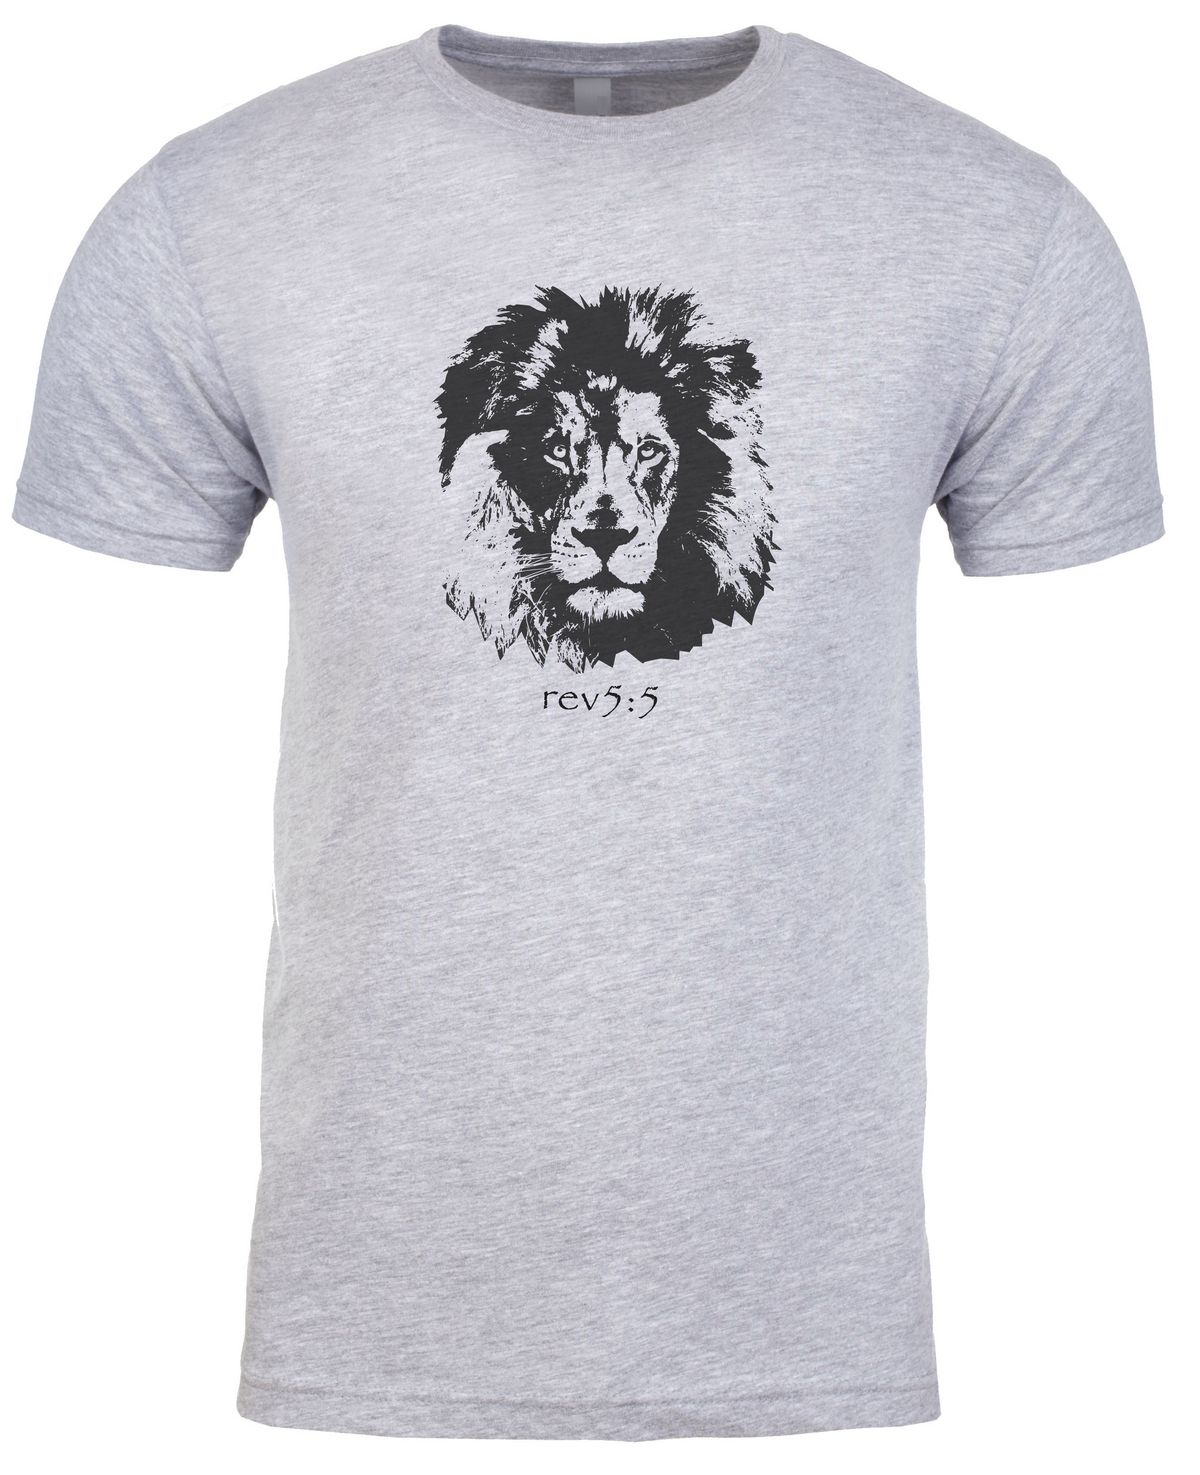 The Lion has Conquered Adult T-shirt